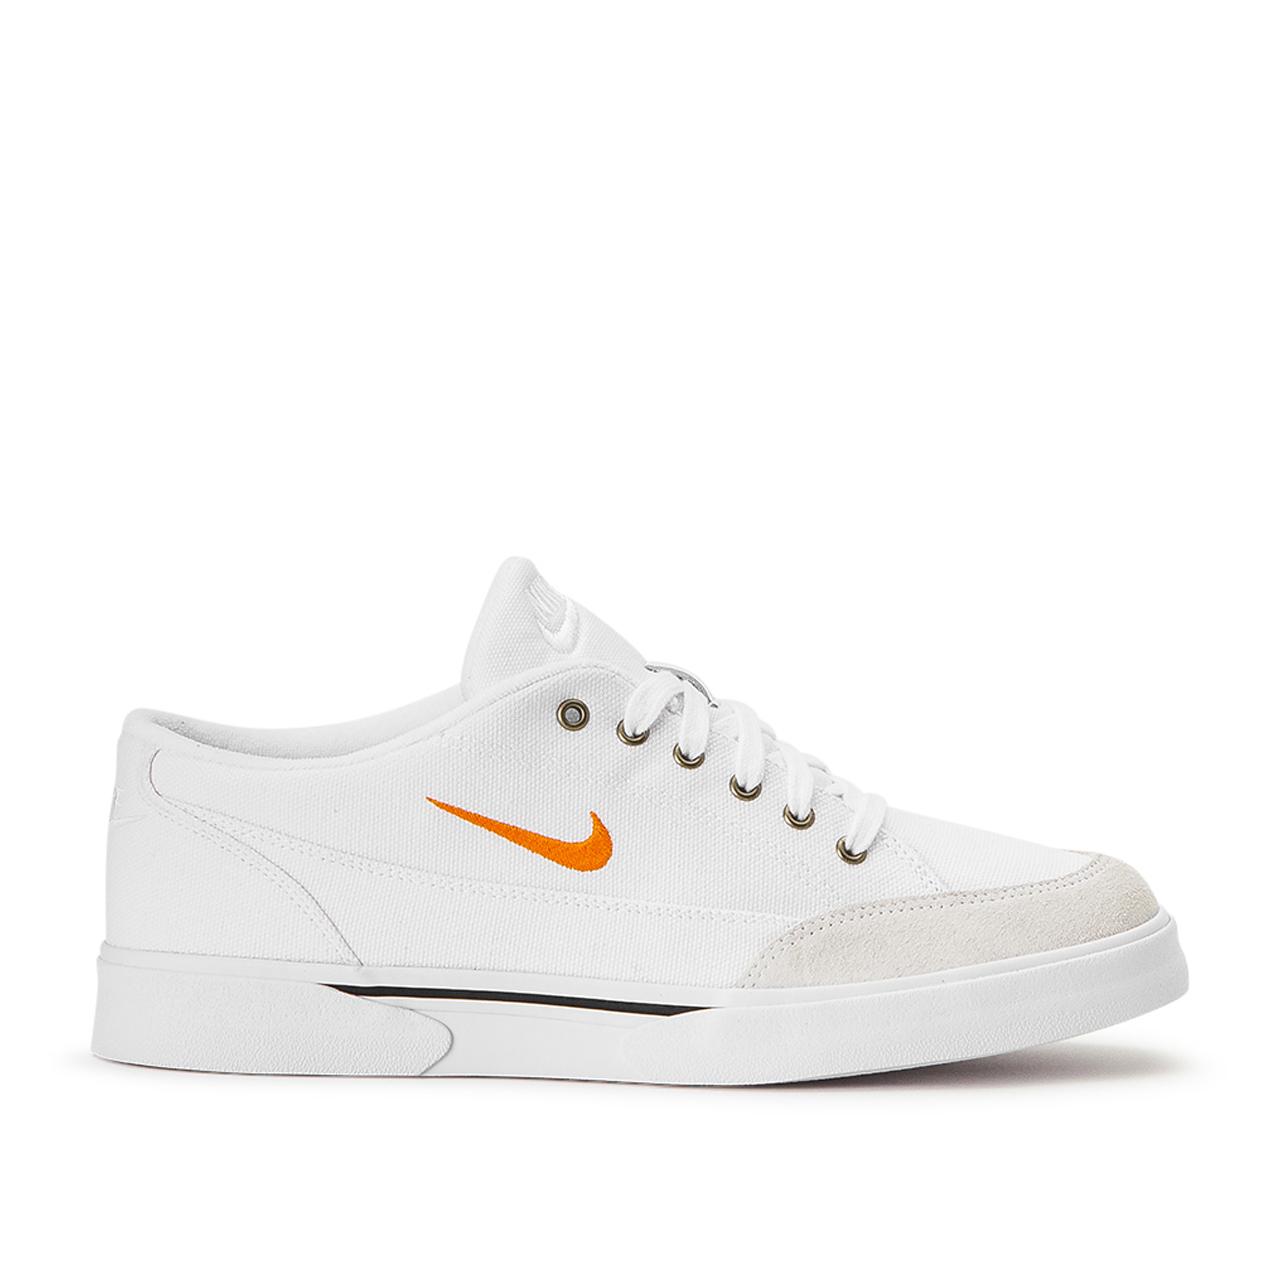 Nike Canvas Gts '16 Txt in White - Lyst